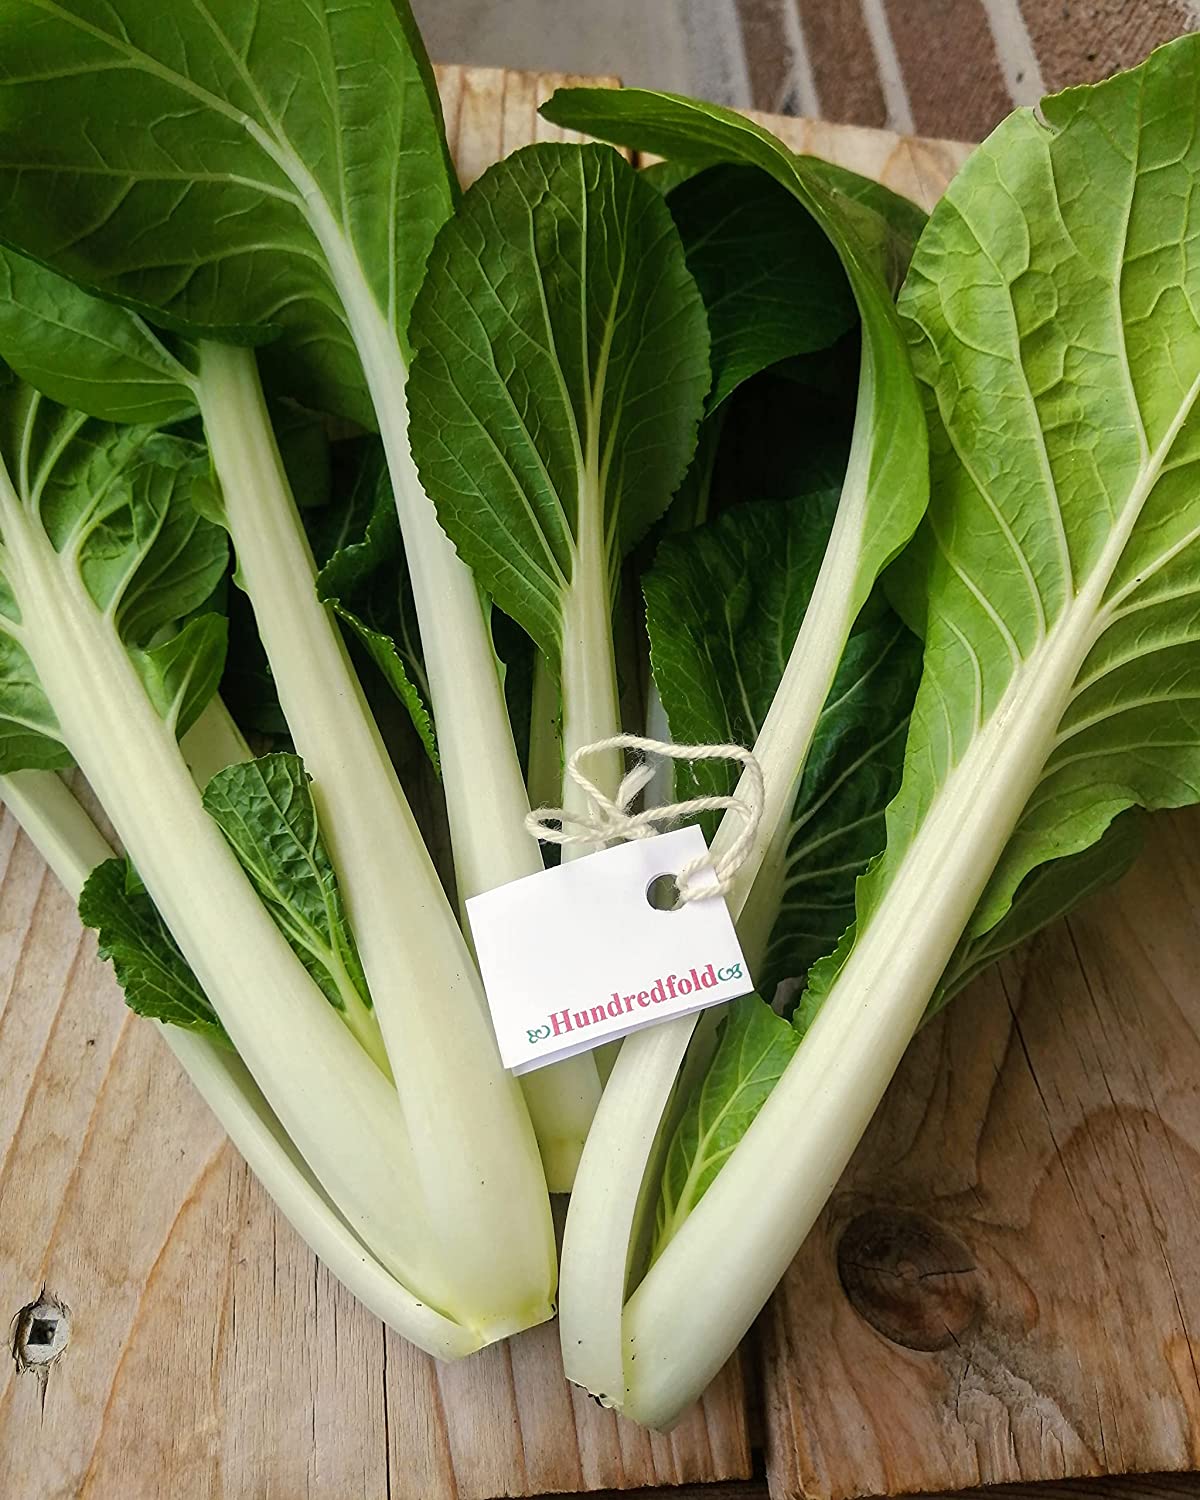 Hundredfold Joi Choi F1 Hybrid Pak Choi Pakchoi 100 Vegetable Seeds - Non-GMO Brassica rapa Chinese Cabbage Bok Choy, Packed and Shipped in Canada